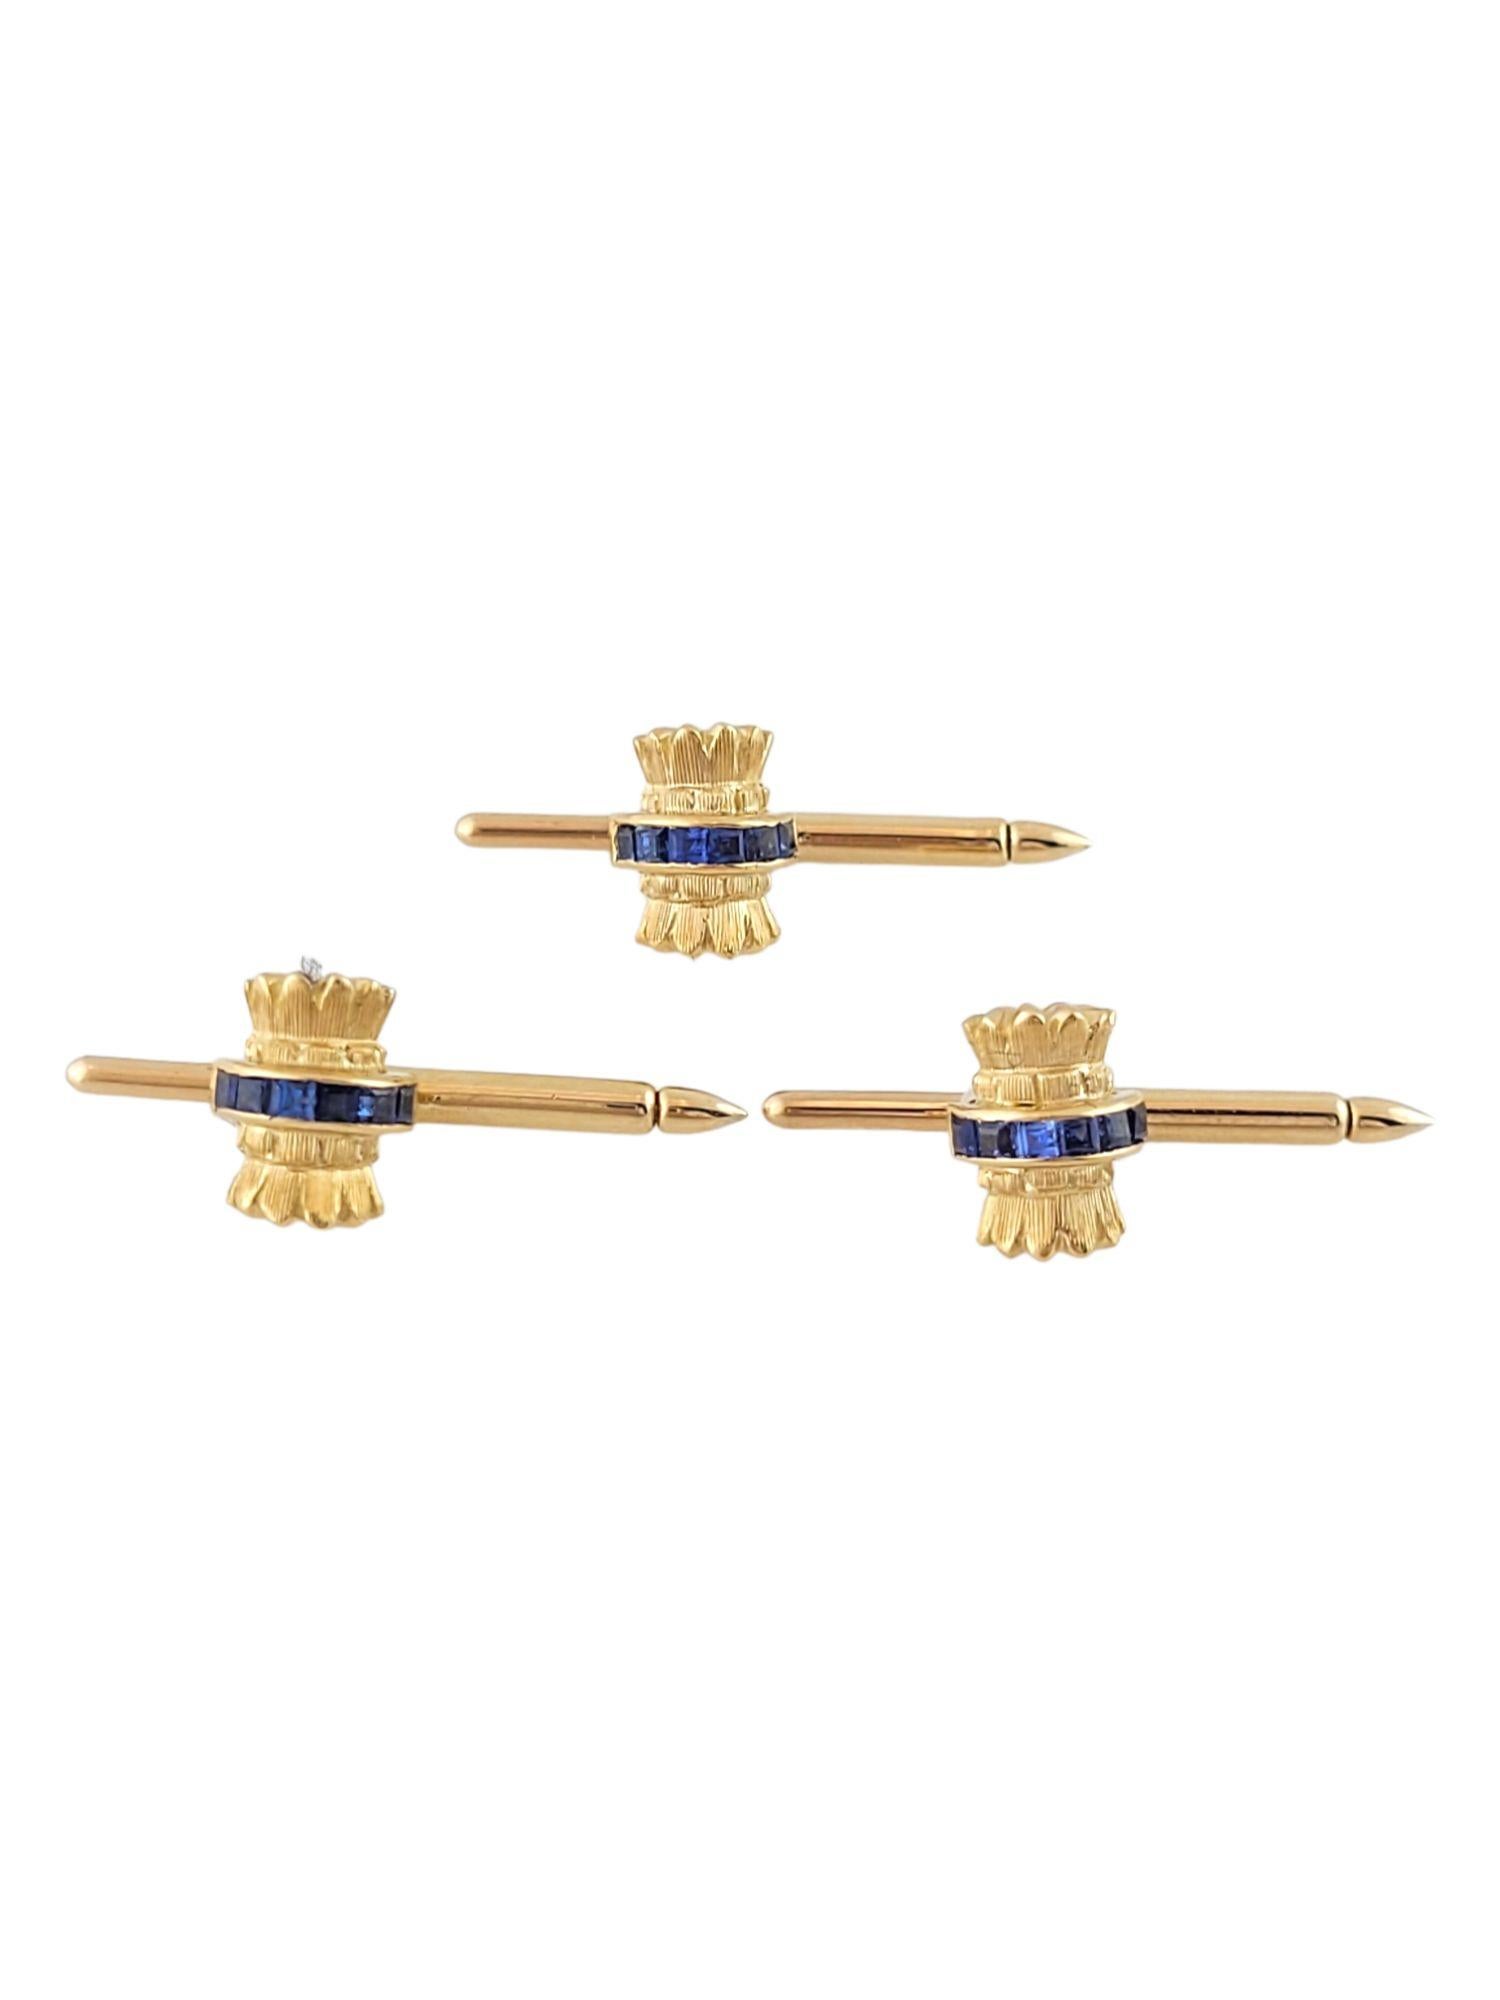 Tiffany & Co 18K Yellow Gold & Sapphire Cufflink and Stud Set #14812 For Sale 2